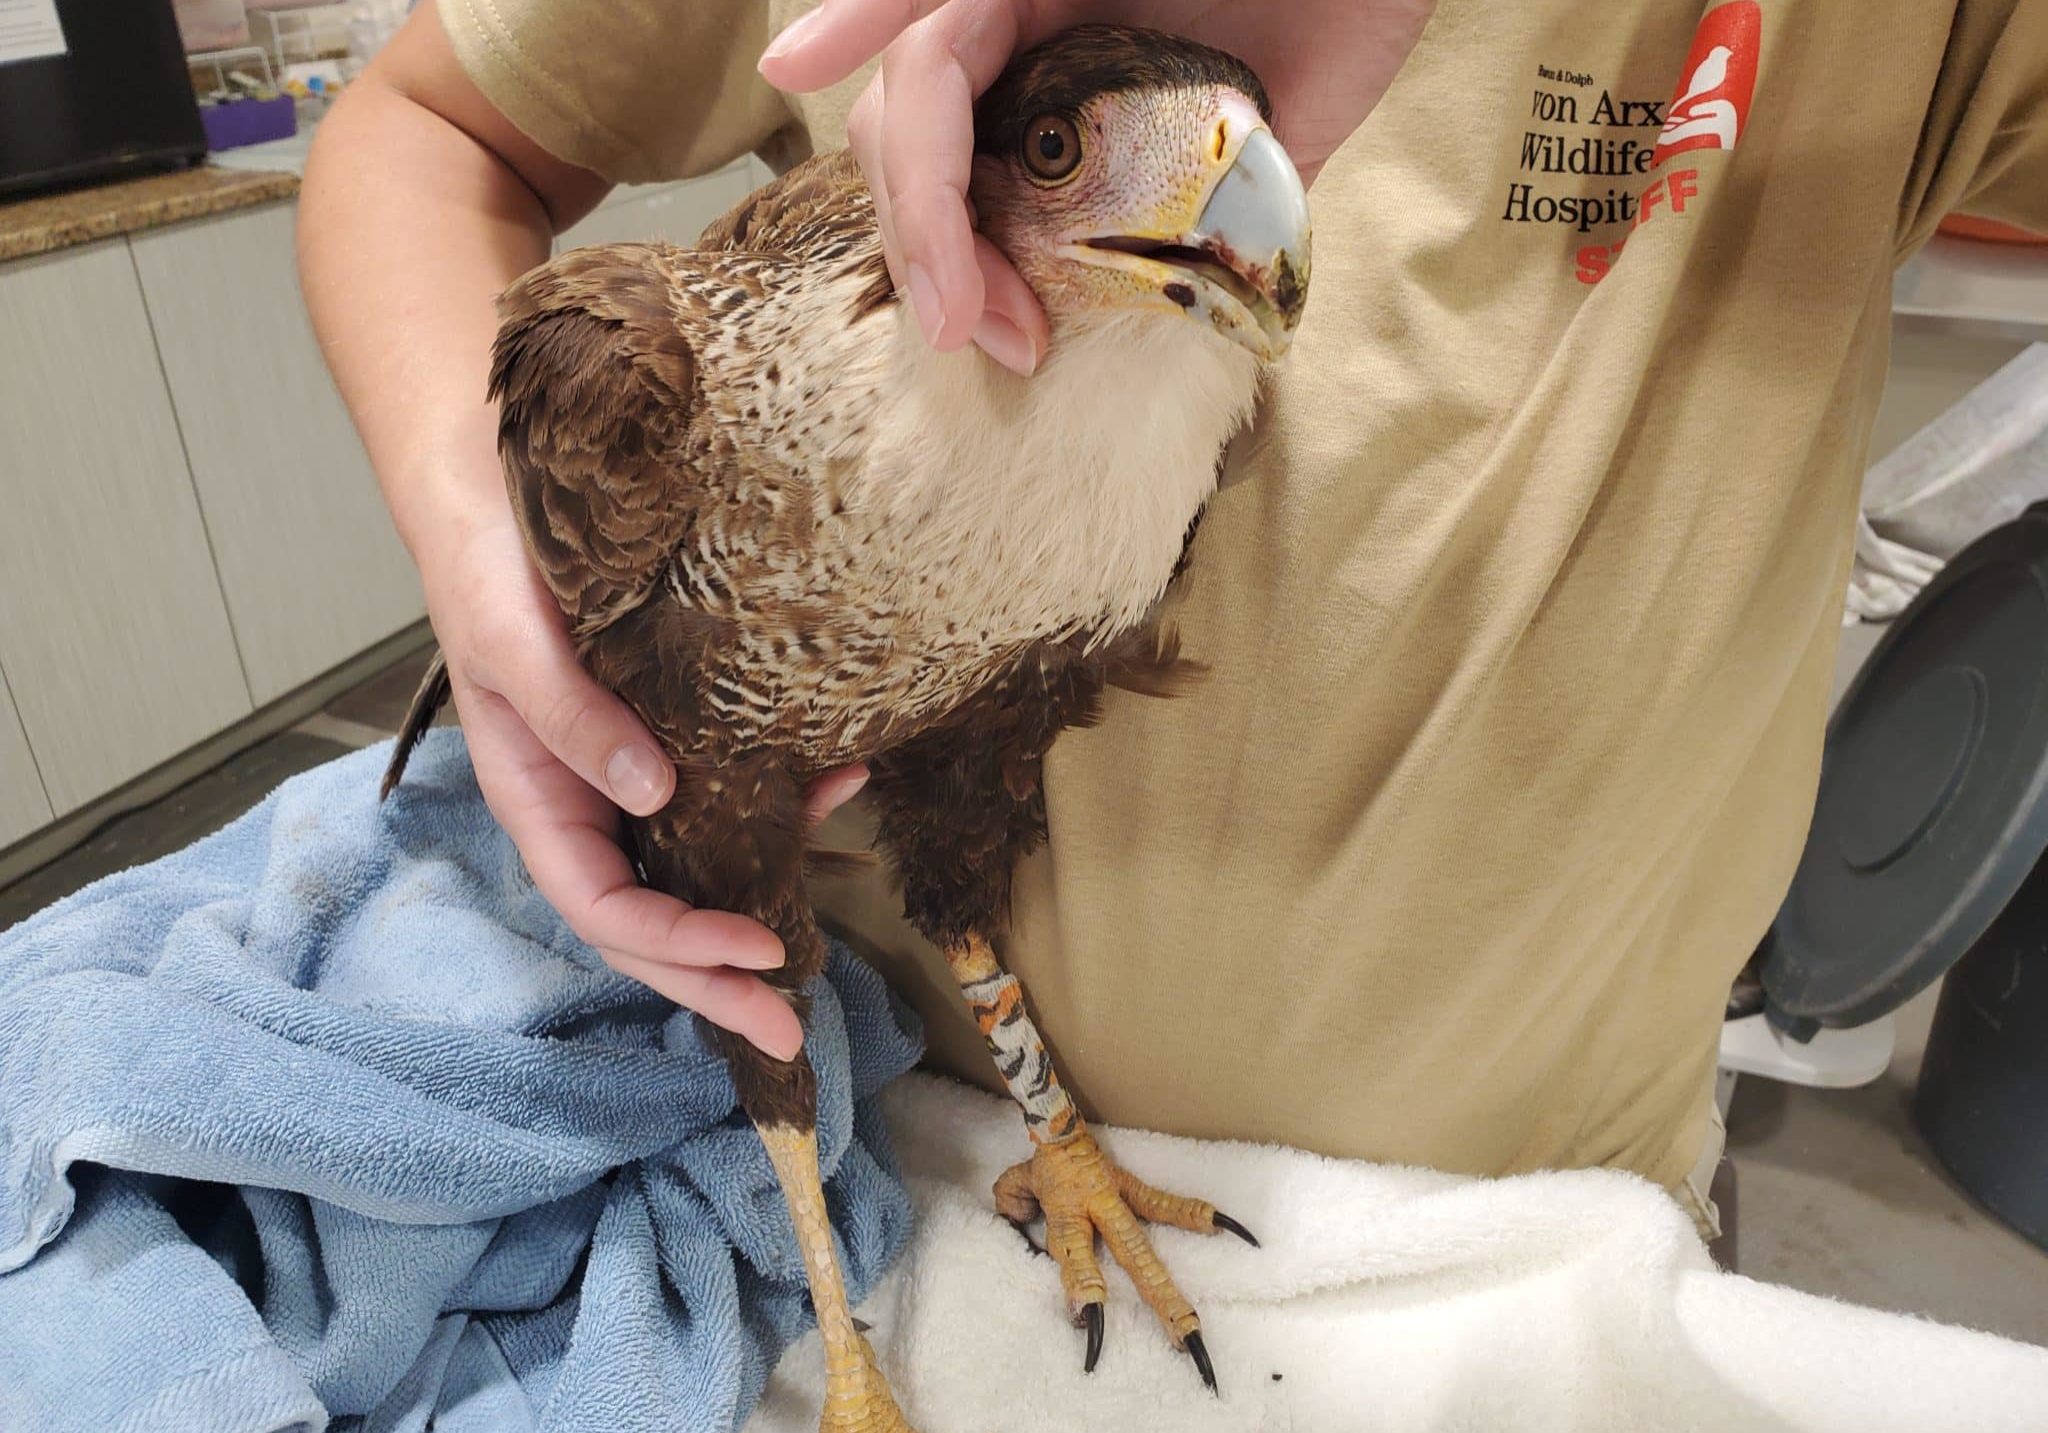 Crested caracara in the wildlife hospital